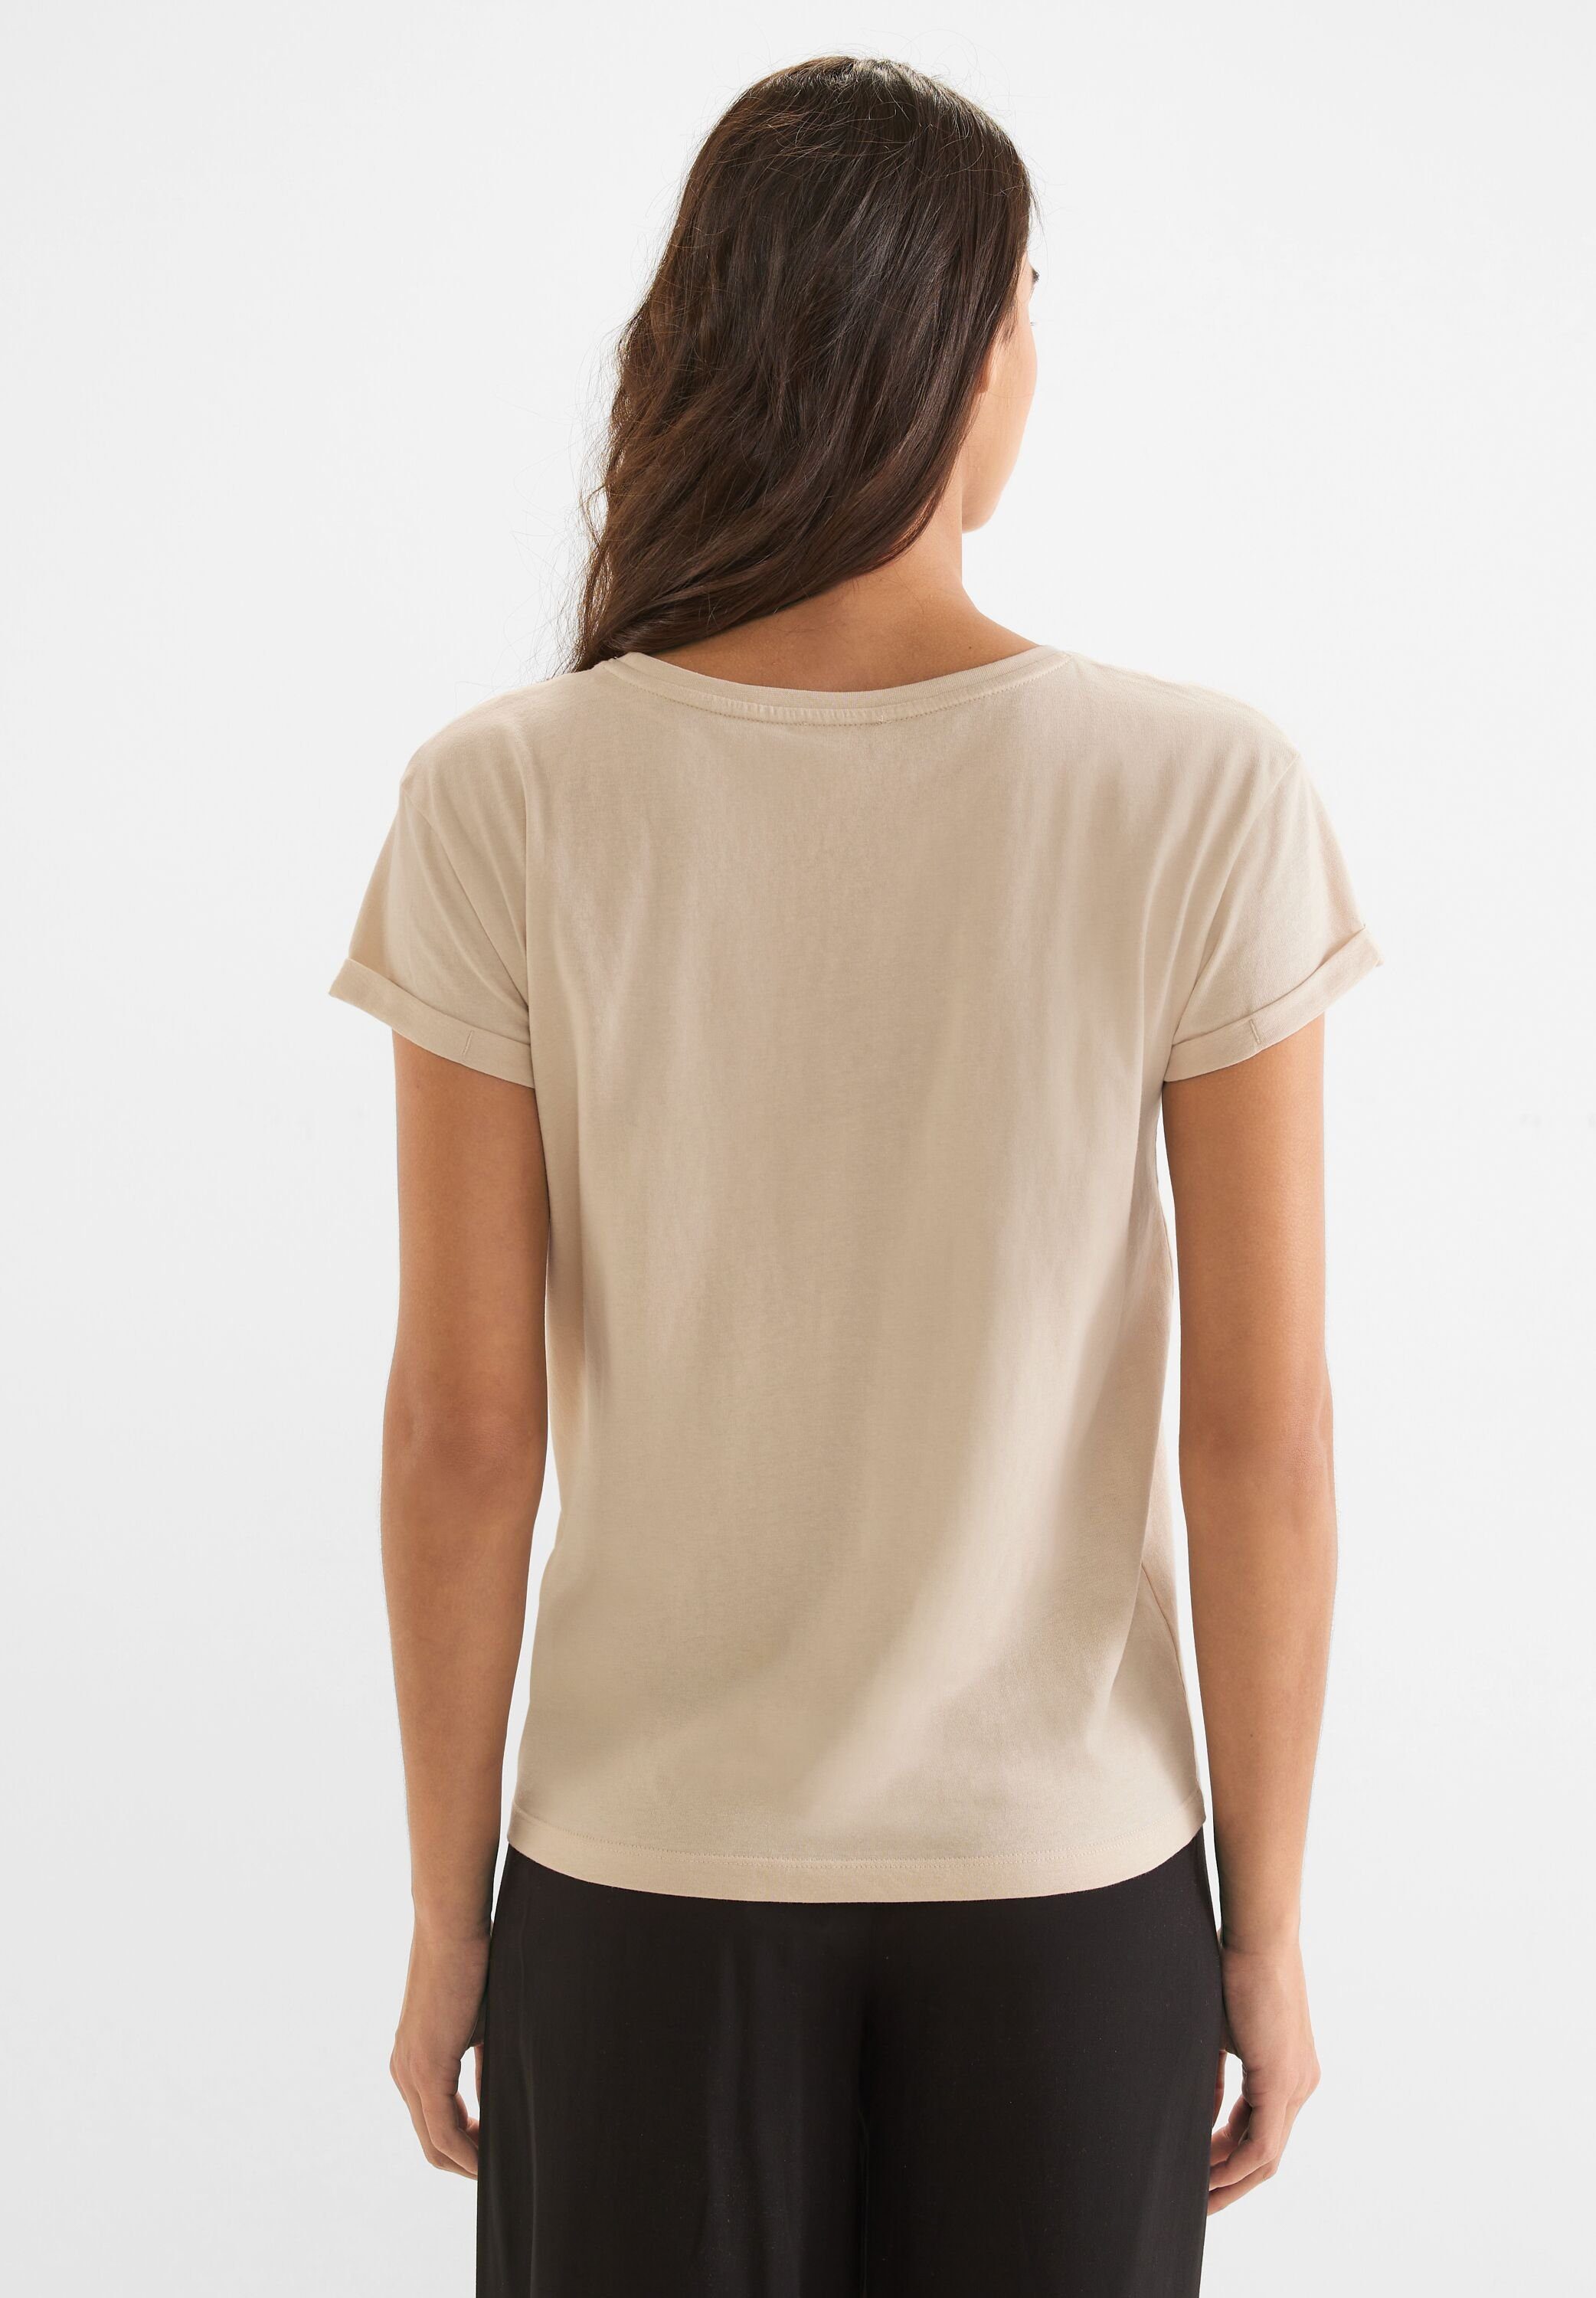 STREET ONE T-Shirt sand Unifarbe light smooth in